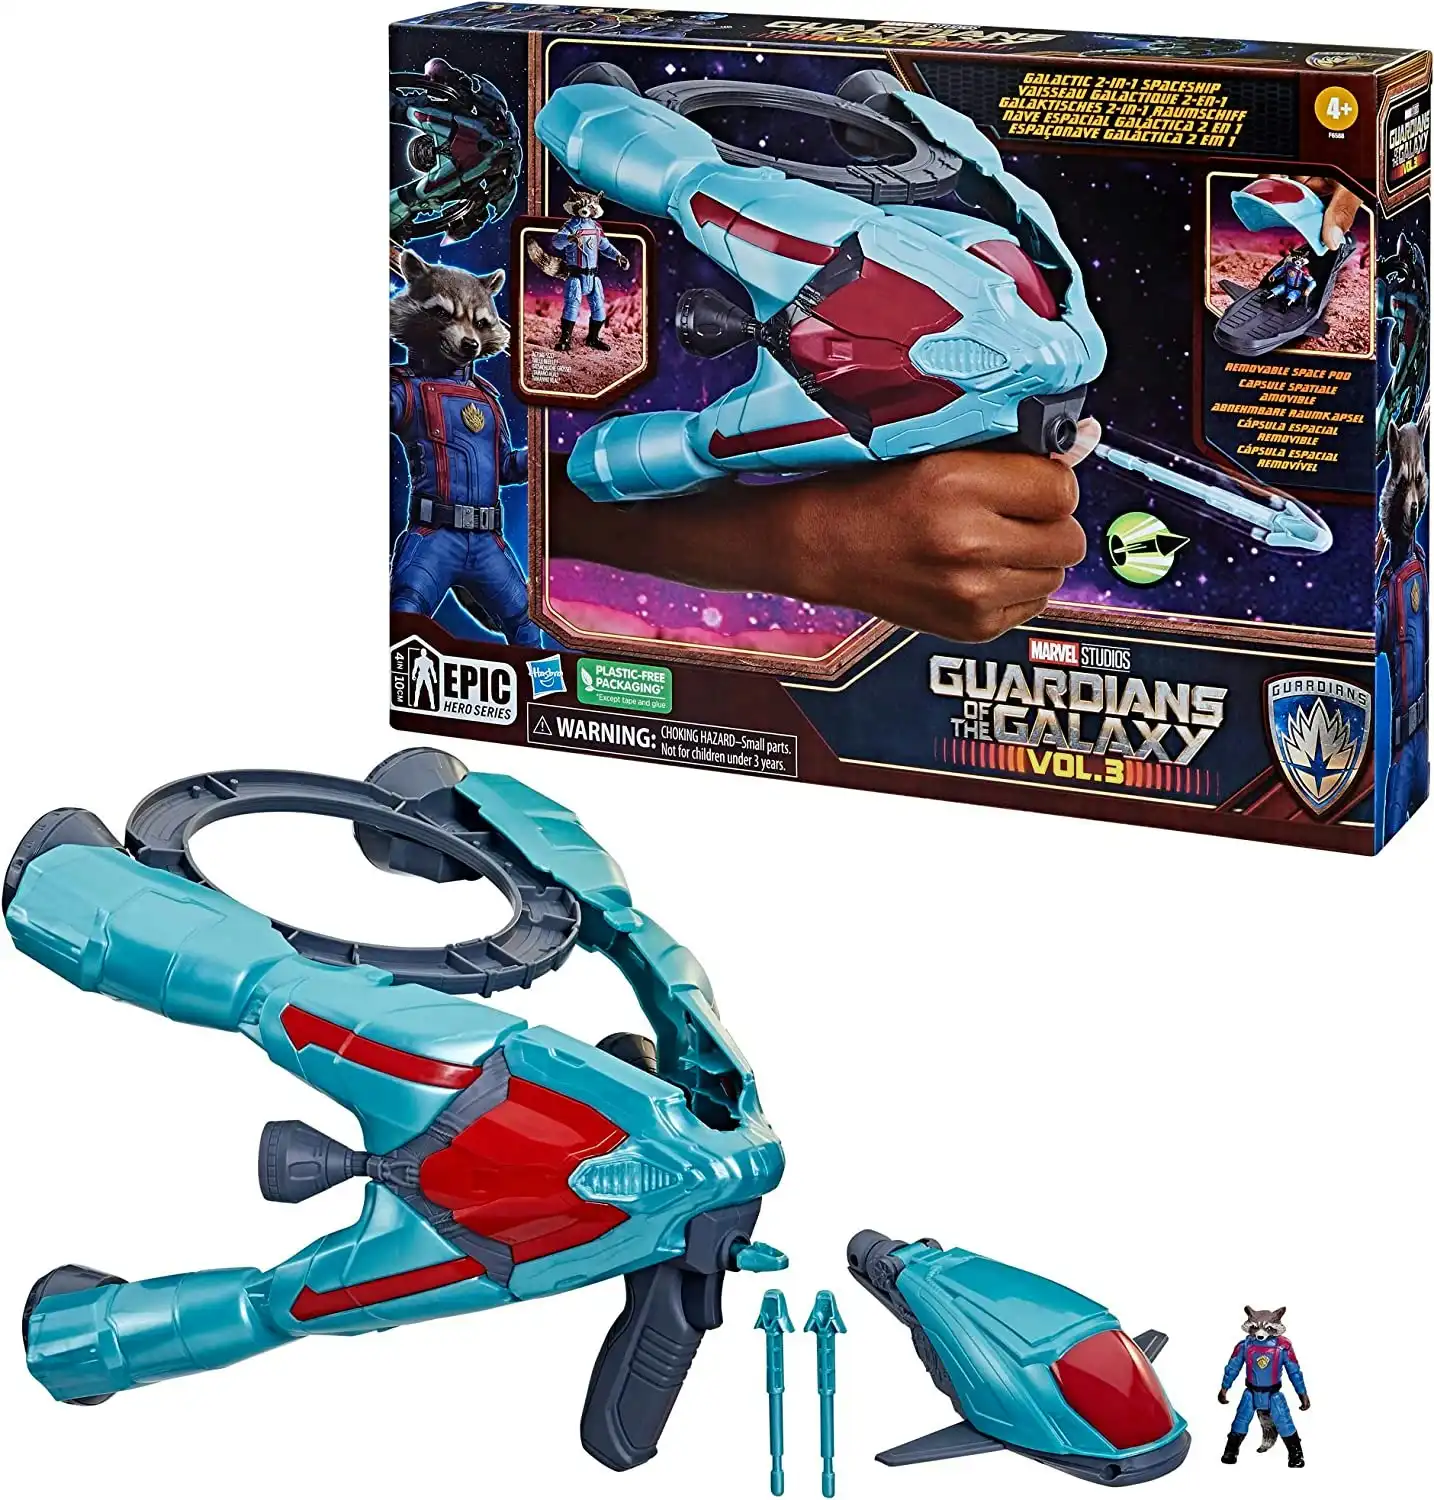 Marvel Guardians of the Galaxy Vol. 3 Galactic Spaceship with Rocket Action Figure